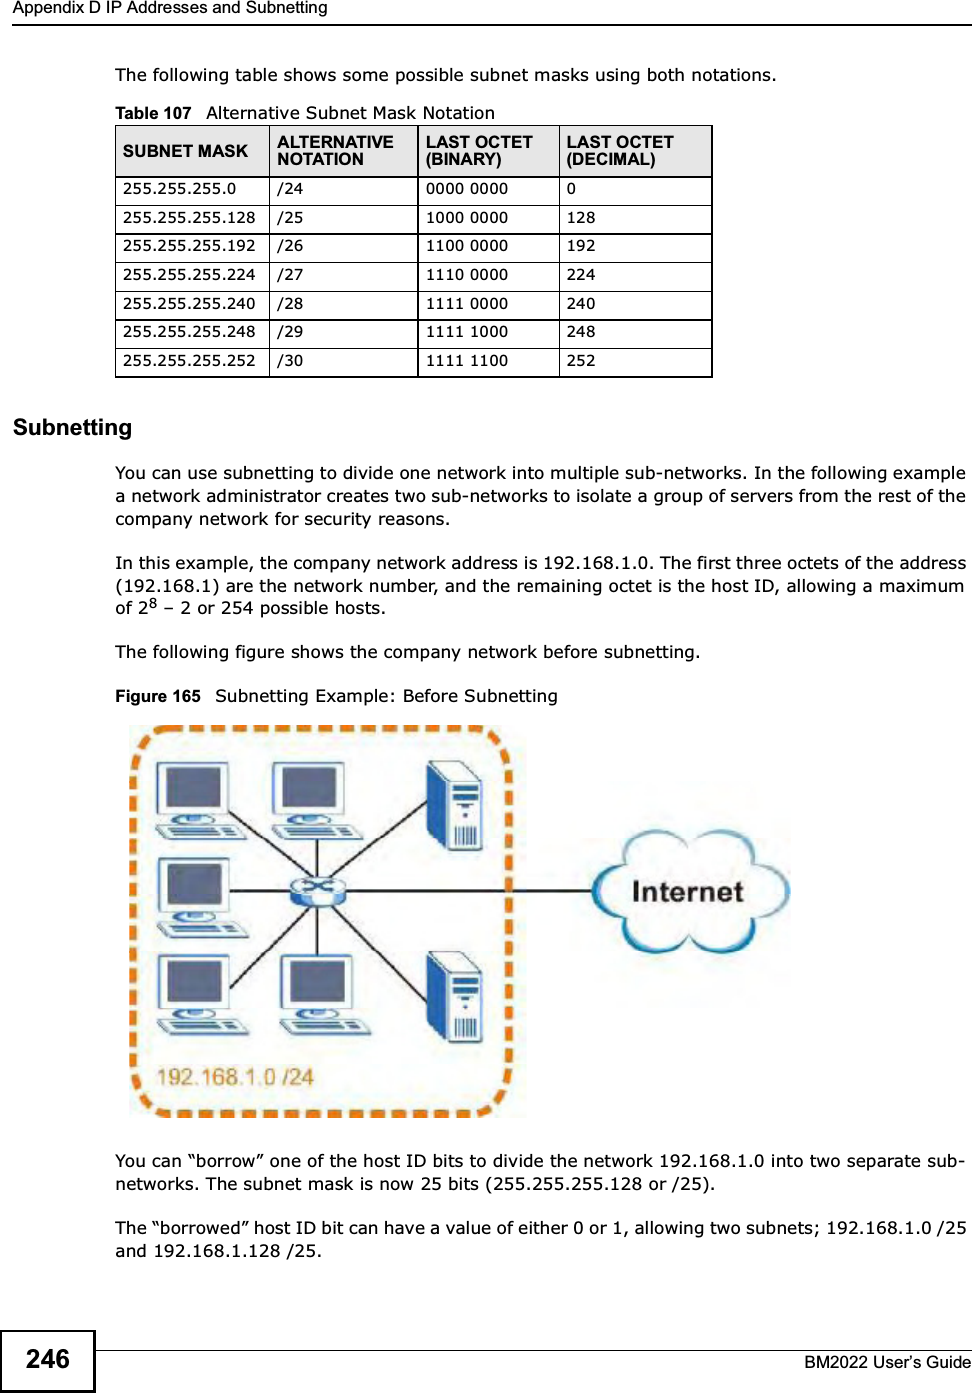 Appendix D IP Addresses and SubnettingBM2022 Users Guide246The following table shows some possible subnet masks using both notations. SubnettingYou can use subnetting to divide one network into multiple sub-networks. In the following example a network administrator creates two sub-networks to isolate a group of servers from the rest of the company network for security reasons.In this example, the company network address is 192.168.1.0. The first three octets of the address (192.168.1) are the network number, and the remaining octet is the host ID, allowing a maximum of 28  2 or 254 possible hosts.The following figure shows the company network before subnetting.  Figure 165   Subnetting Example: Before SubnettingYou can borrow one of the host ID bits to divide the network 192.168.1.0 into two separate sub-networks. The subnet mask is now 25 bits (255.255.255.128 or /25).The borrowed host ID bit can have a value of either 0 or 1, allowing two subnets; 192.168.1.0 /25 and 192.168.1.128 /25. Table 107   Alternative Subnet Mask NotationSUBNET MASK ALTERNATIVE NOTATIONLAST OCTET (BINARY)LAST OCTET (DECIMAL)255.255.255.0 /24 0000 0000 0255.255.255.128 /25 1000 0000 128255.255.255.192 /26 1100 0000 192255.255.255.224 /27 1110 0000 224255.255.255.240 /28 1111 0000 240255.255.255.248 /29 1111 1000 248255.255.255.252 /30 1111 1100 252